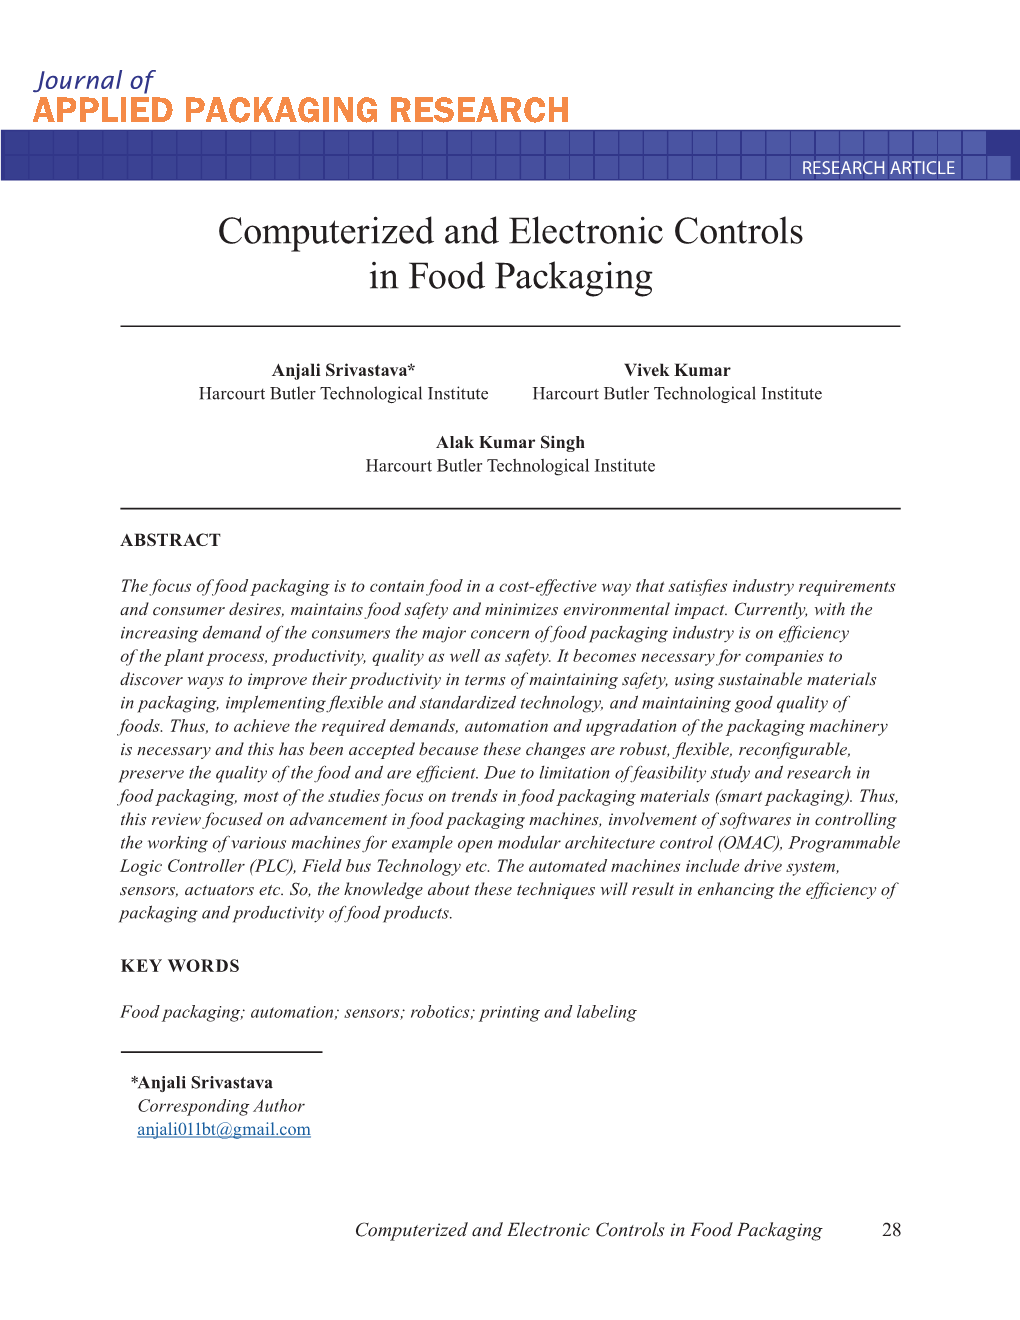 Computerized and Electronic Controls in Food Packaging